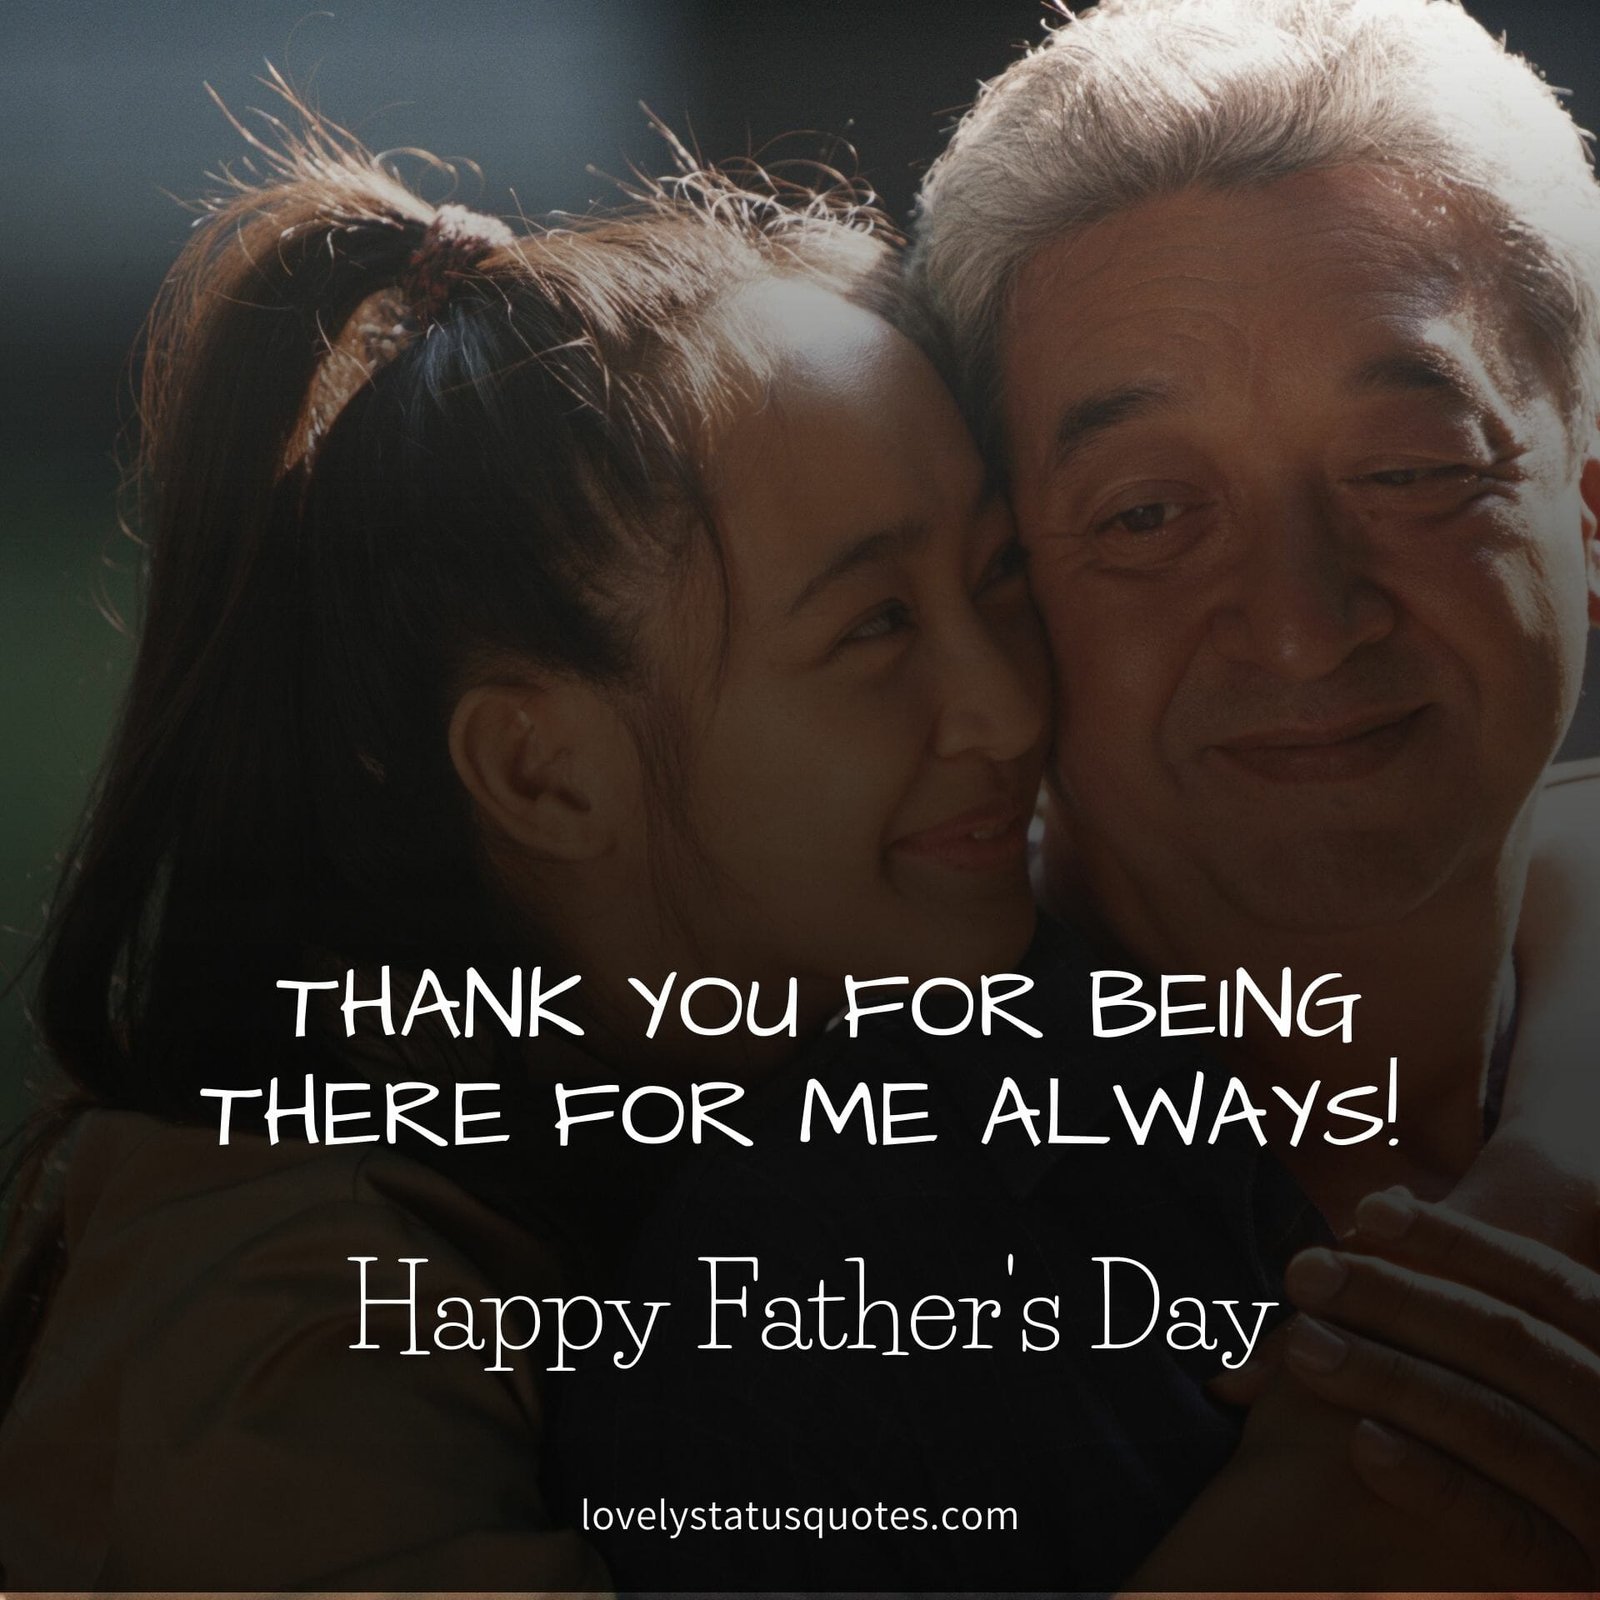 Happy Fathers Day wishes images